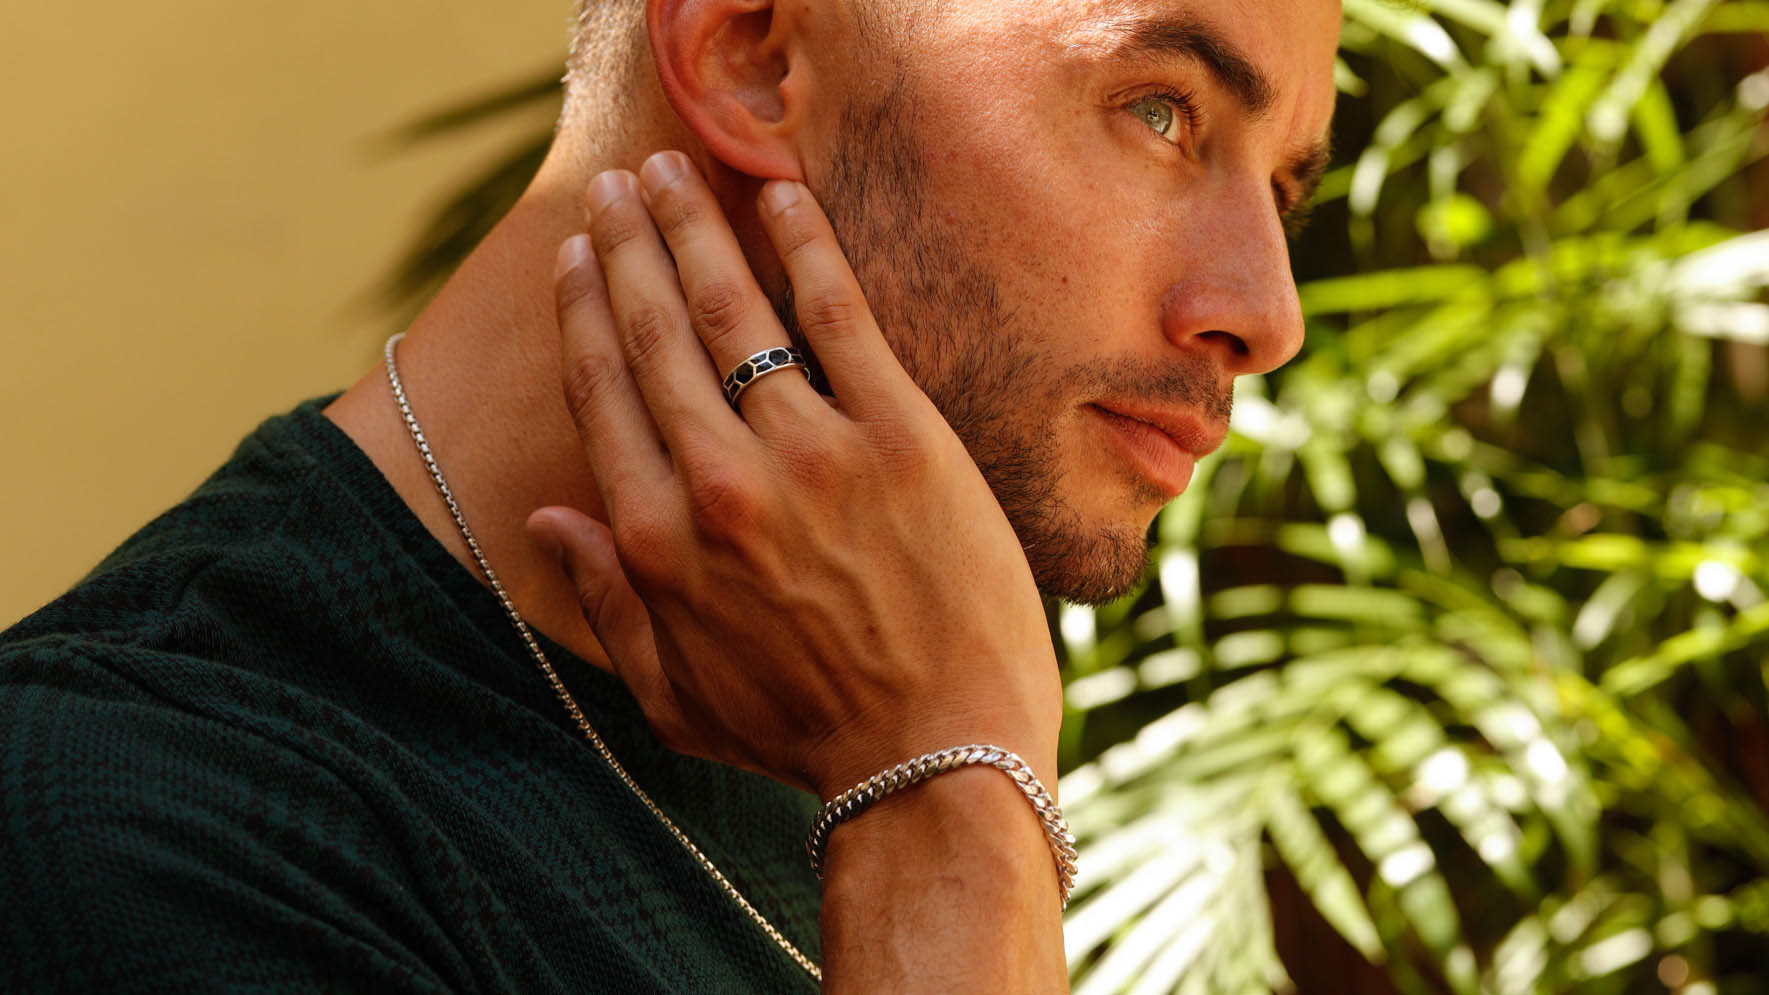 Image of men with ring, necklace, and bracelet